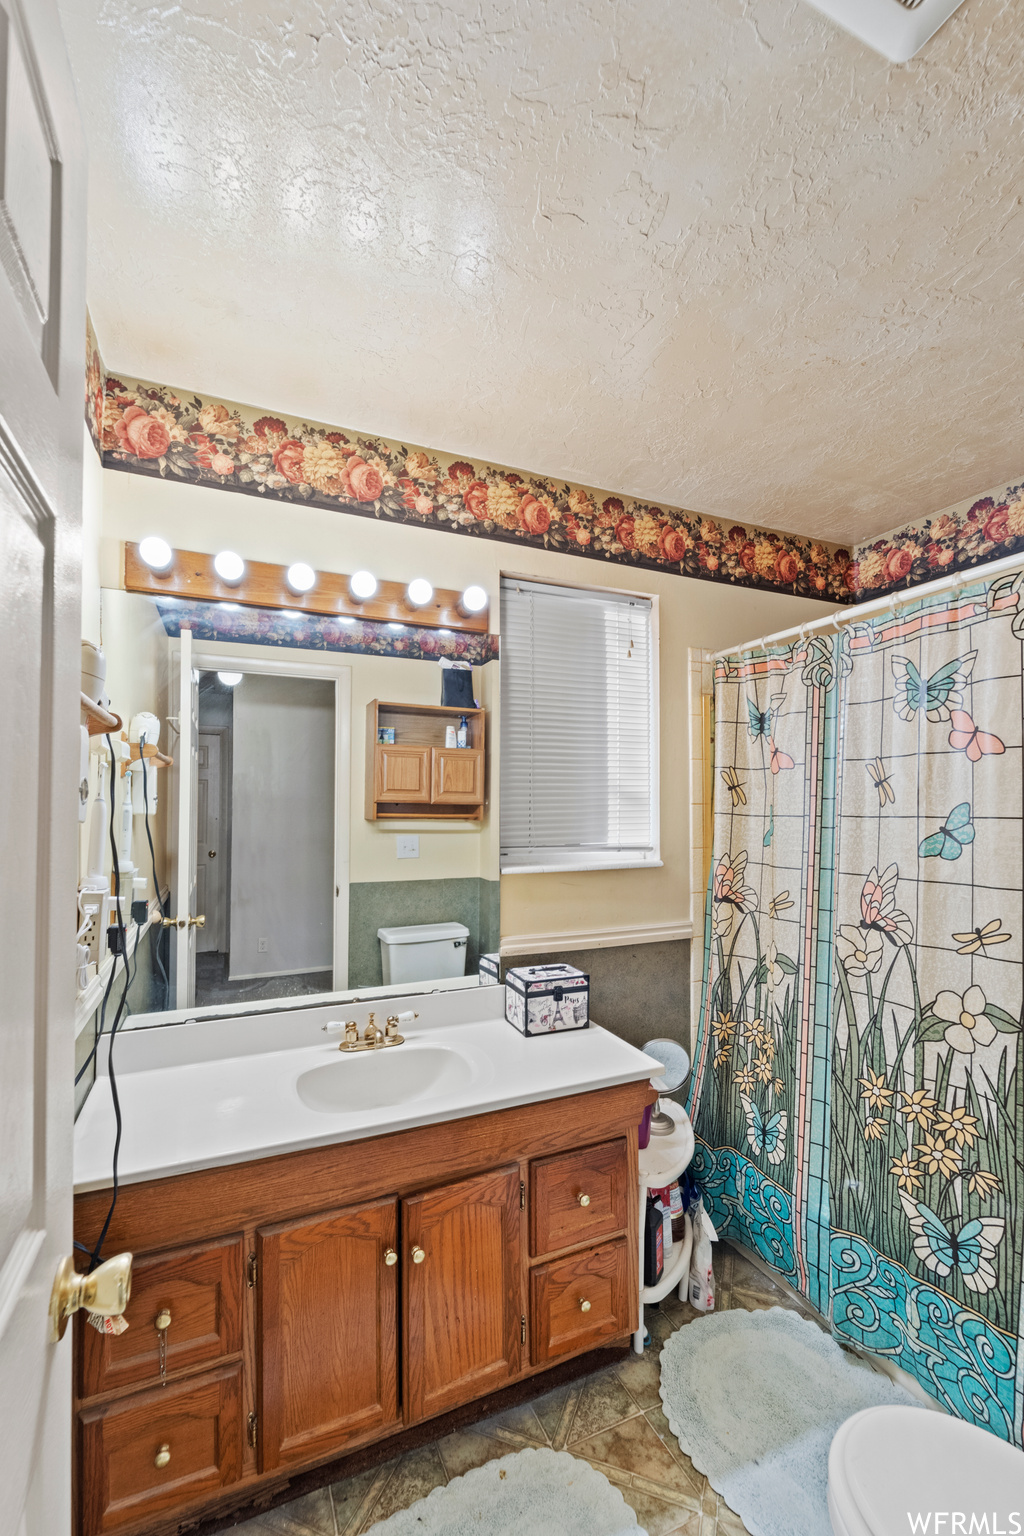 Bathroom with toilet, tile floors, a textured ceiling, and vanity